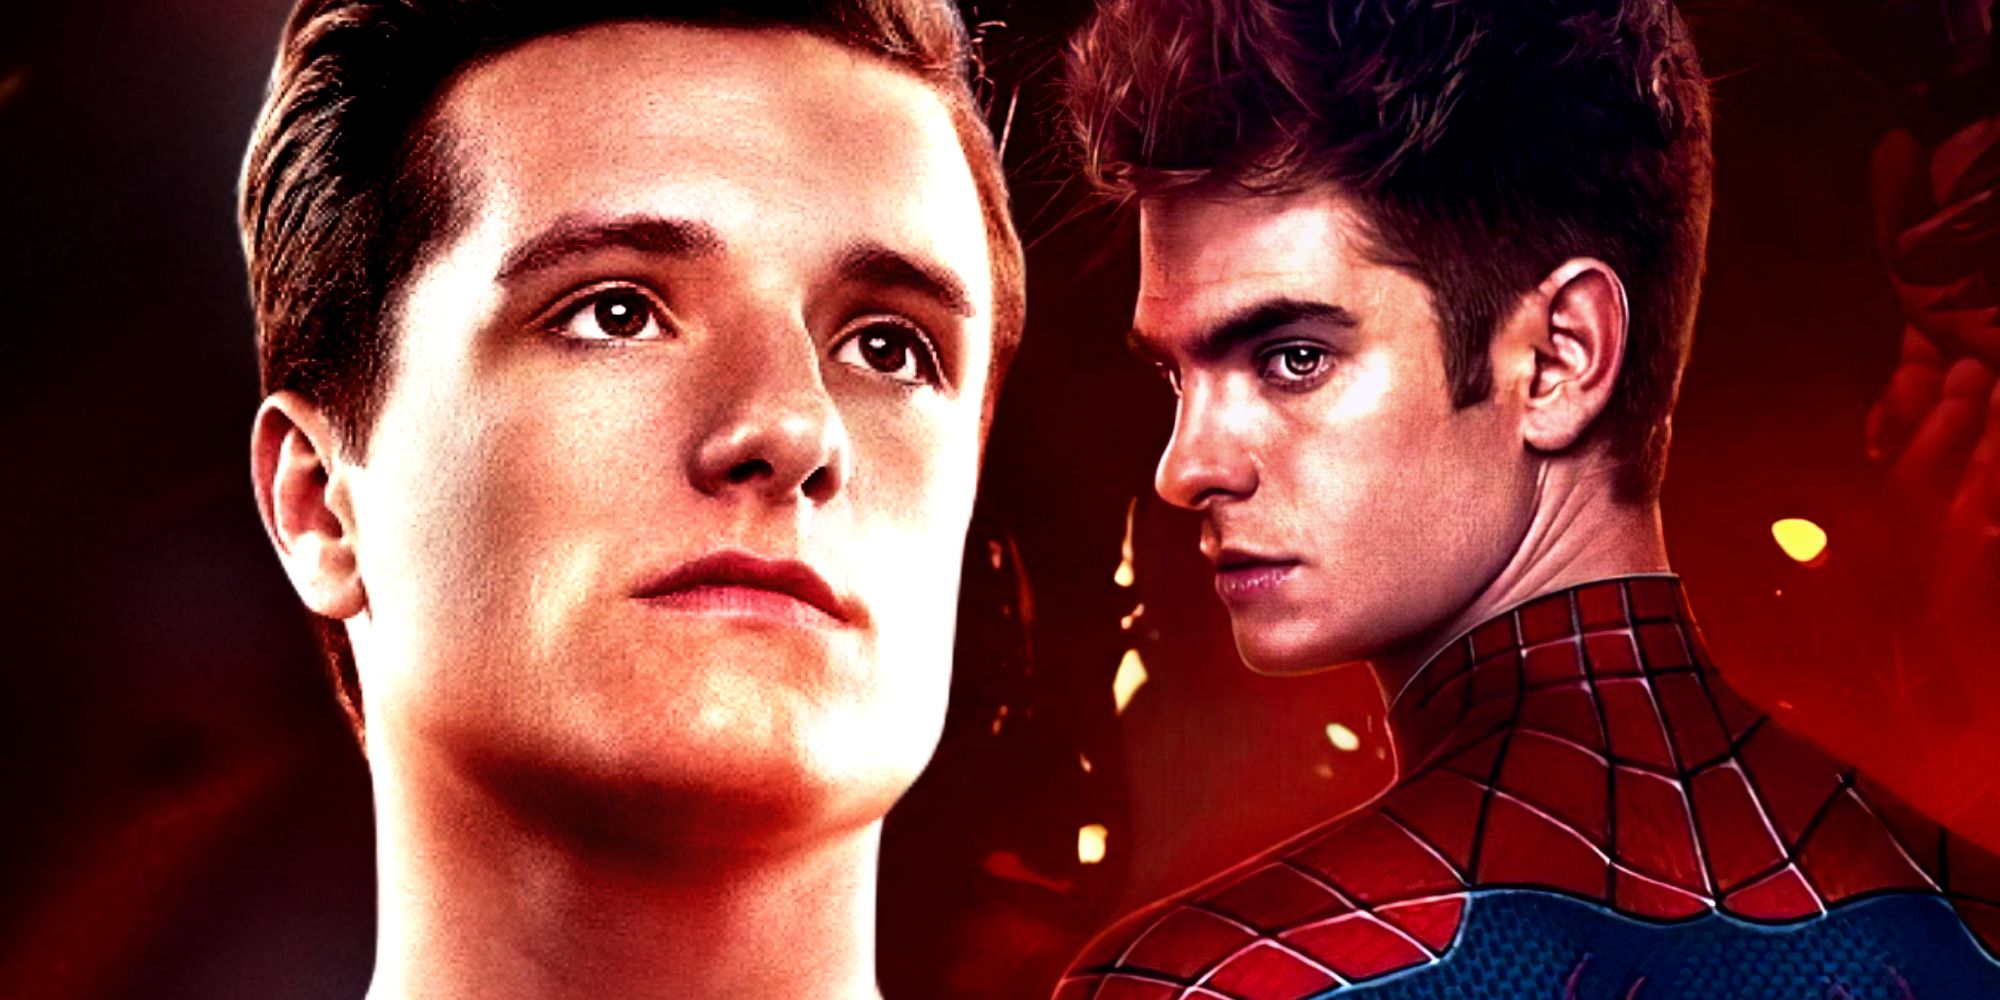 Josh Hutcherson and Andrew Garfield as Peter Parker in The Amazing Spider-Man